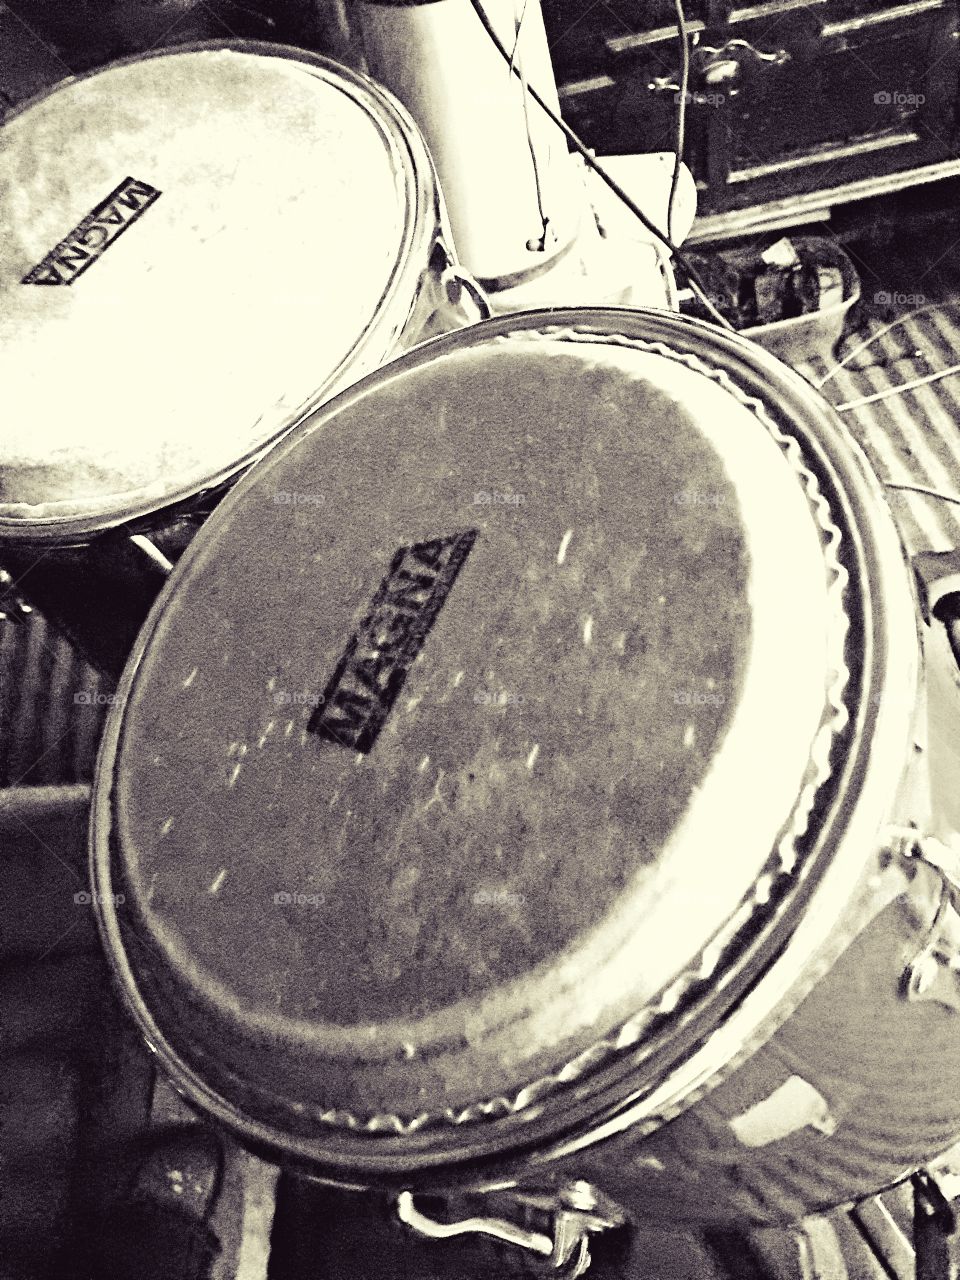 Black and white photo of a set of Magna bongo drums.